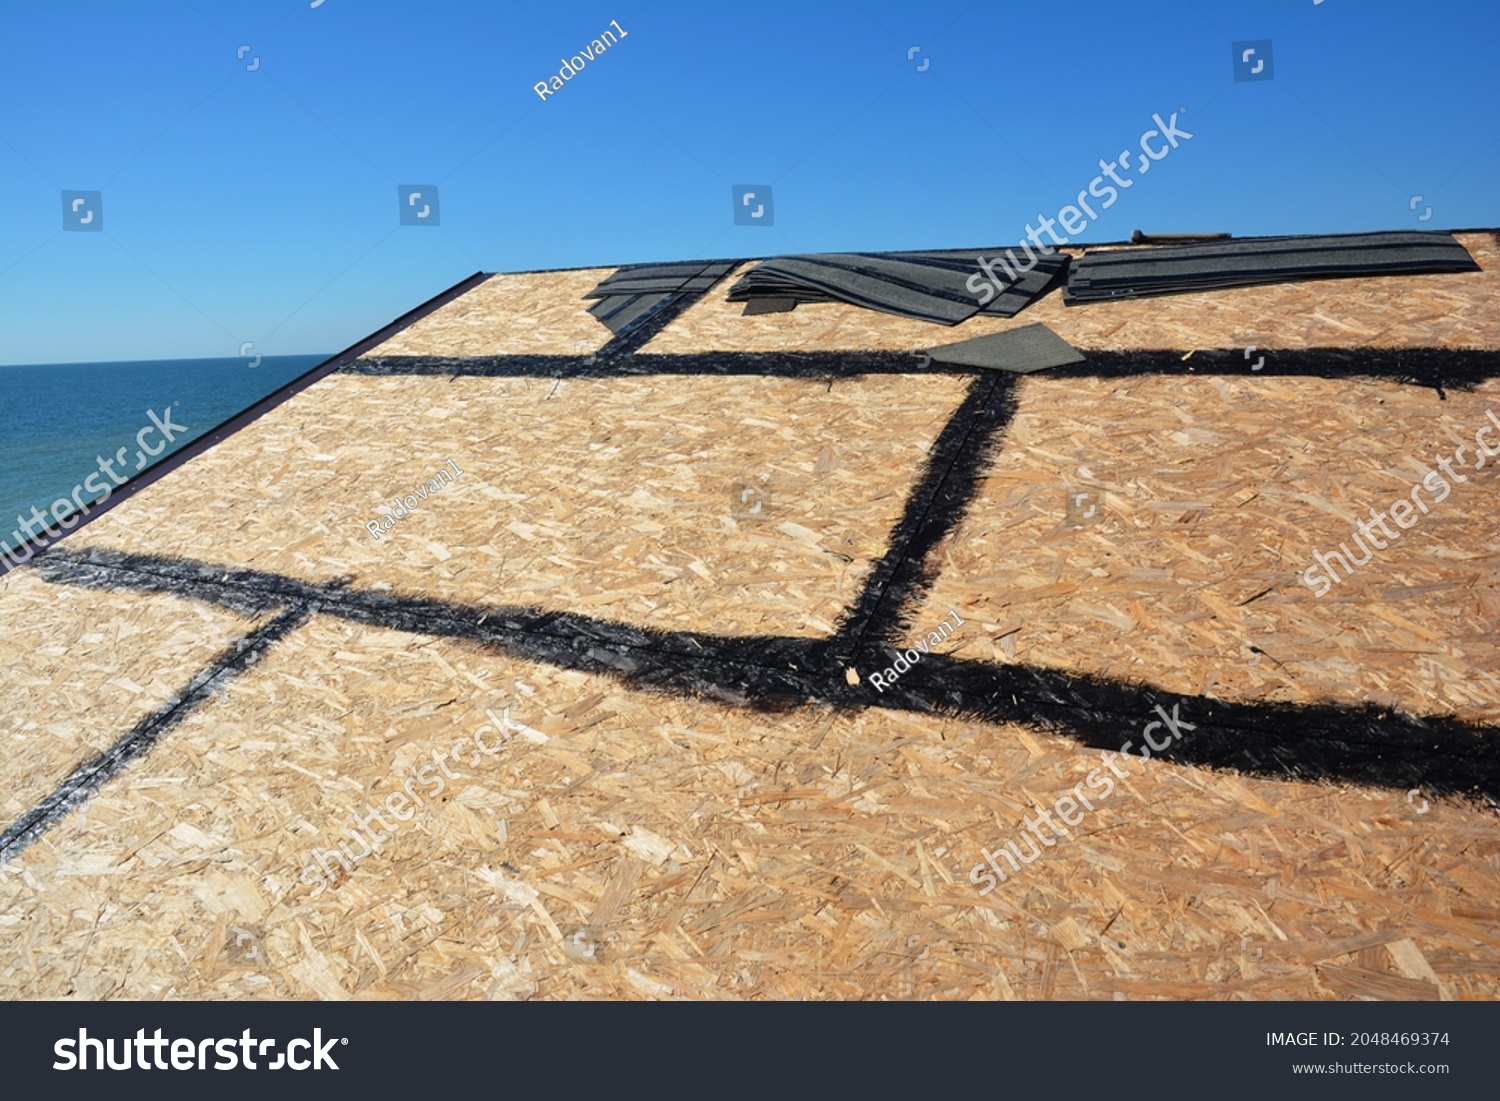 Roofing construction and waterproofing. A close-up of OSB roof deck, roof sheathing with hot rubberized asphalt, bitumen, tar waterproofing before asphalt shingles installation. #2048469374